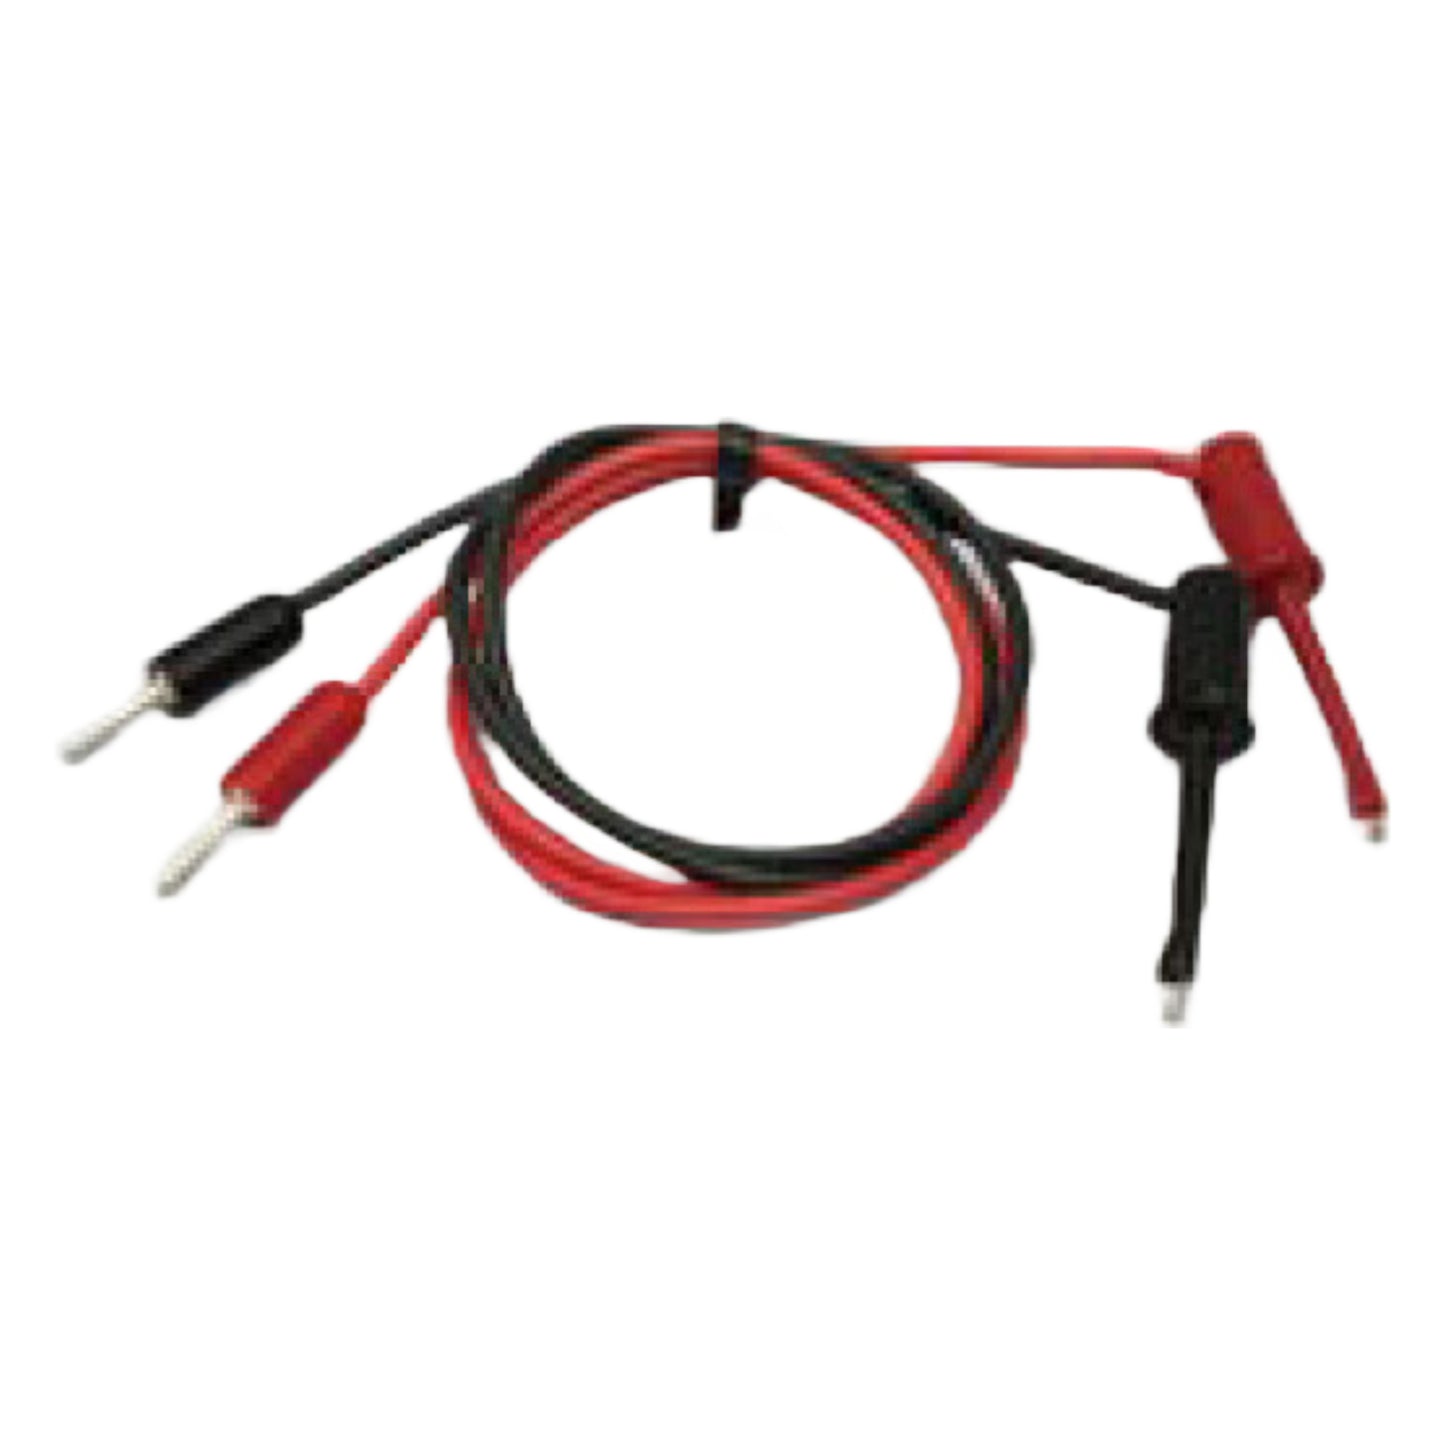 Hook & male plug cable, red & black(D117)